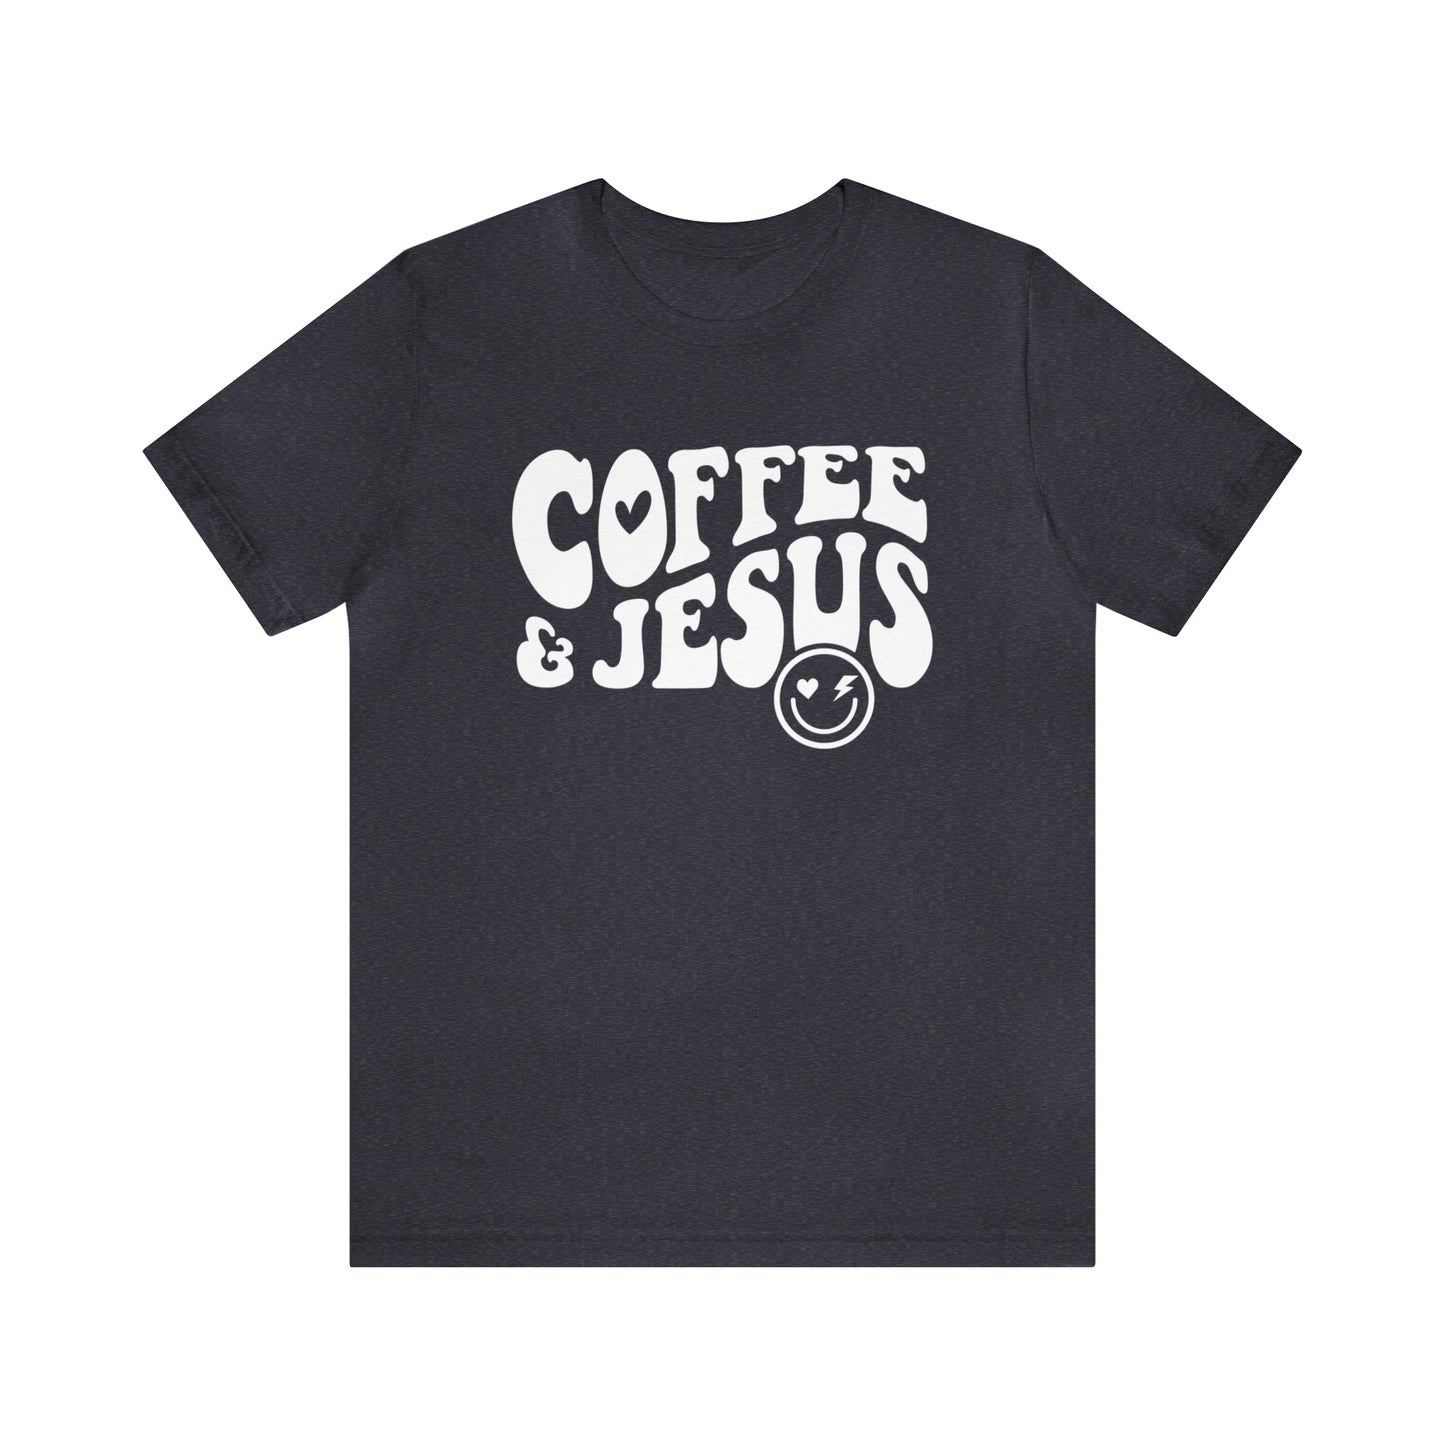 Coffee and Jesus - Jersey Short Sleeve T-Shirt